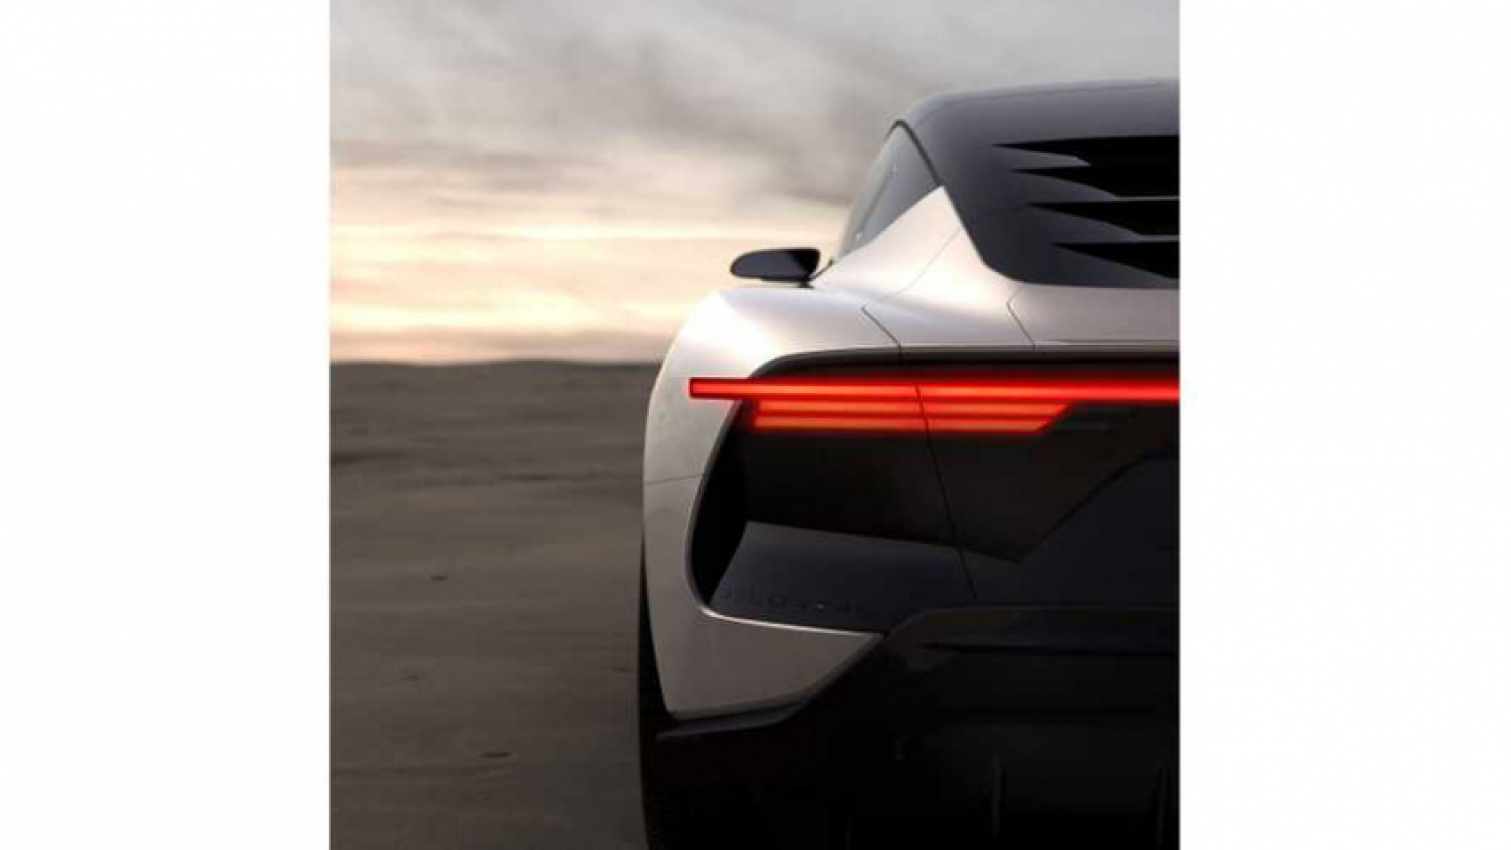 autos, cars, delorean, delorean releases clearer teaser image of new ev, debuts august 18